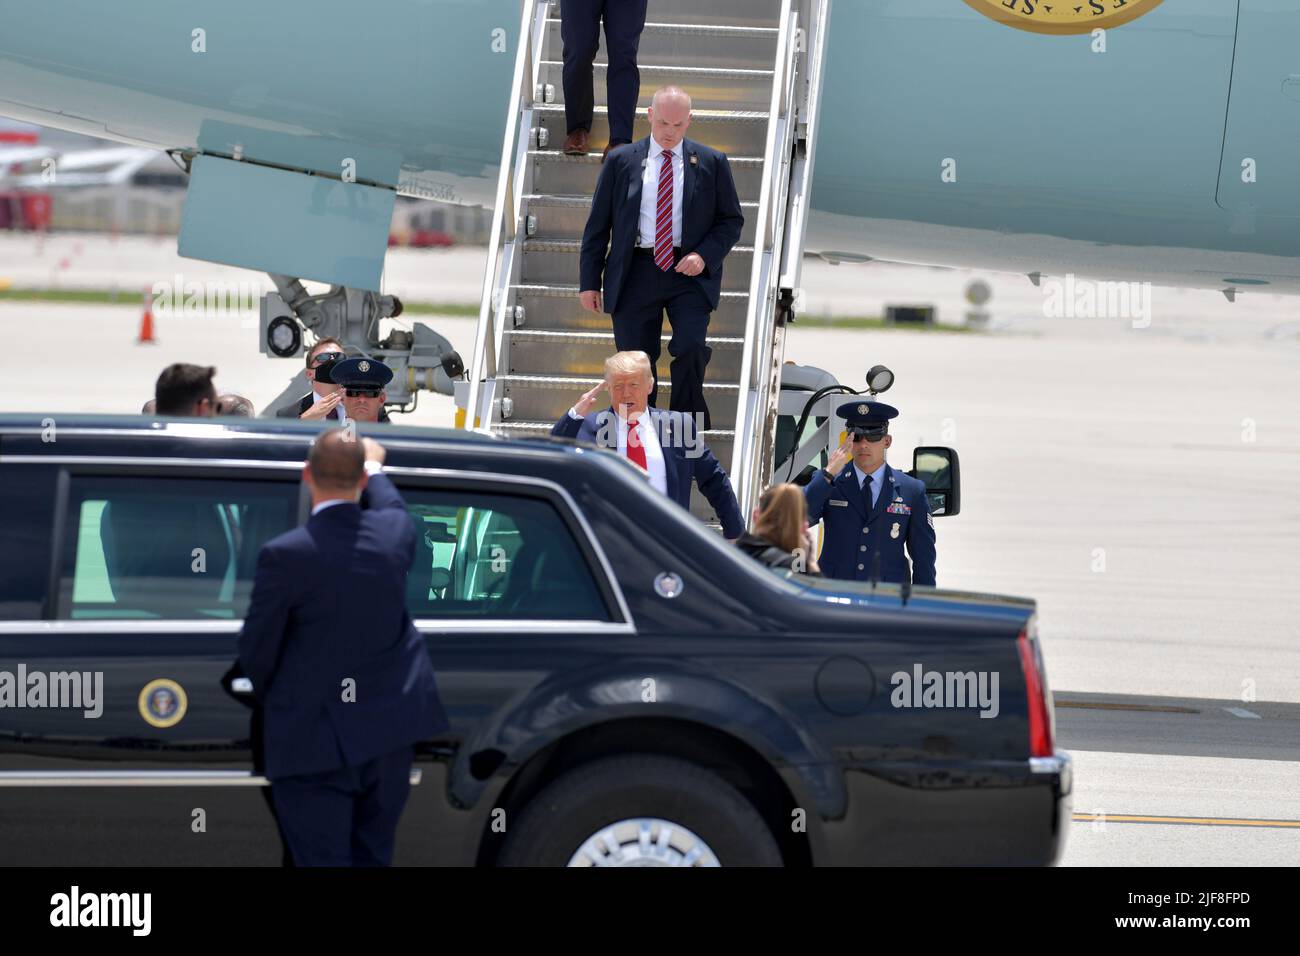 Miami, United States Of America. 10th July, 2020. MIAMI, FL - JULY 10: US President Donald Trump arriving at Miami International Airport on July 10, 2020 in Miami, Florida. The President was greeted by Carlos A. Gimnez Mayor of Miami-Dade County and is in town to receive a briefing on SOUTHCOM Enhanced Counternarcotics Operation and to attend Iglesia Doral Jesus Worship Center to participate in a roundtable on Supporting the People of Venezuela People: President Donald Trump Credit: Storms Media Group/Alamy Live News Stock Photo